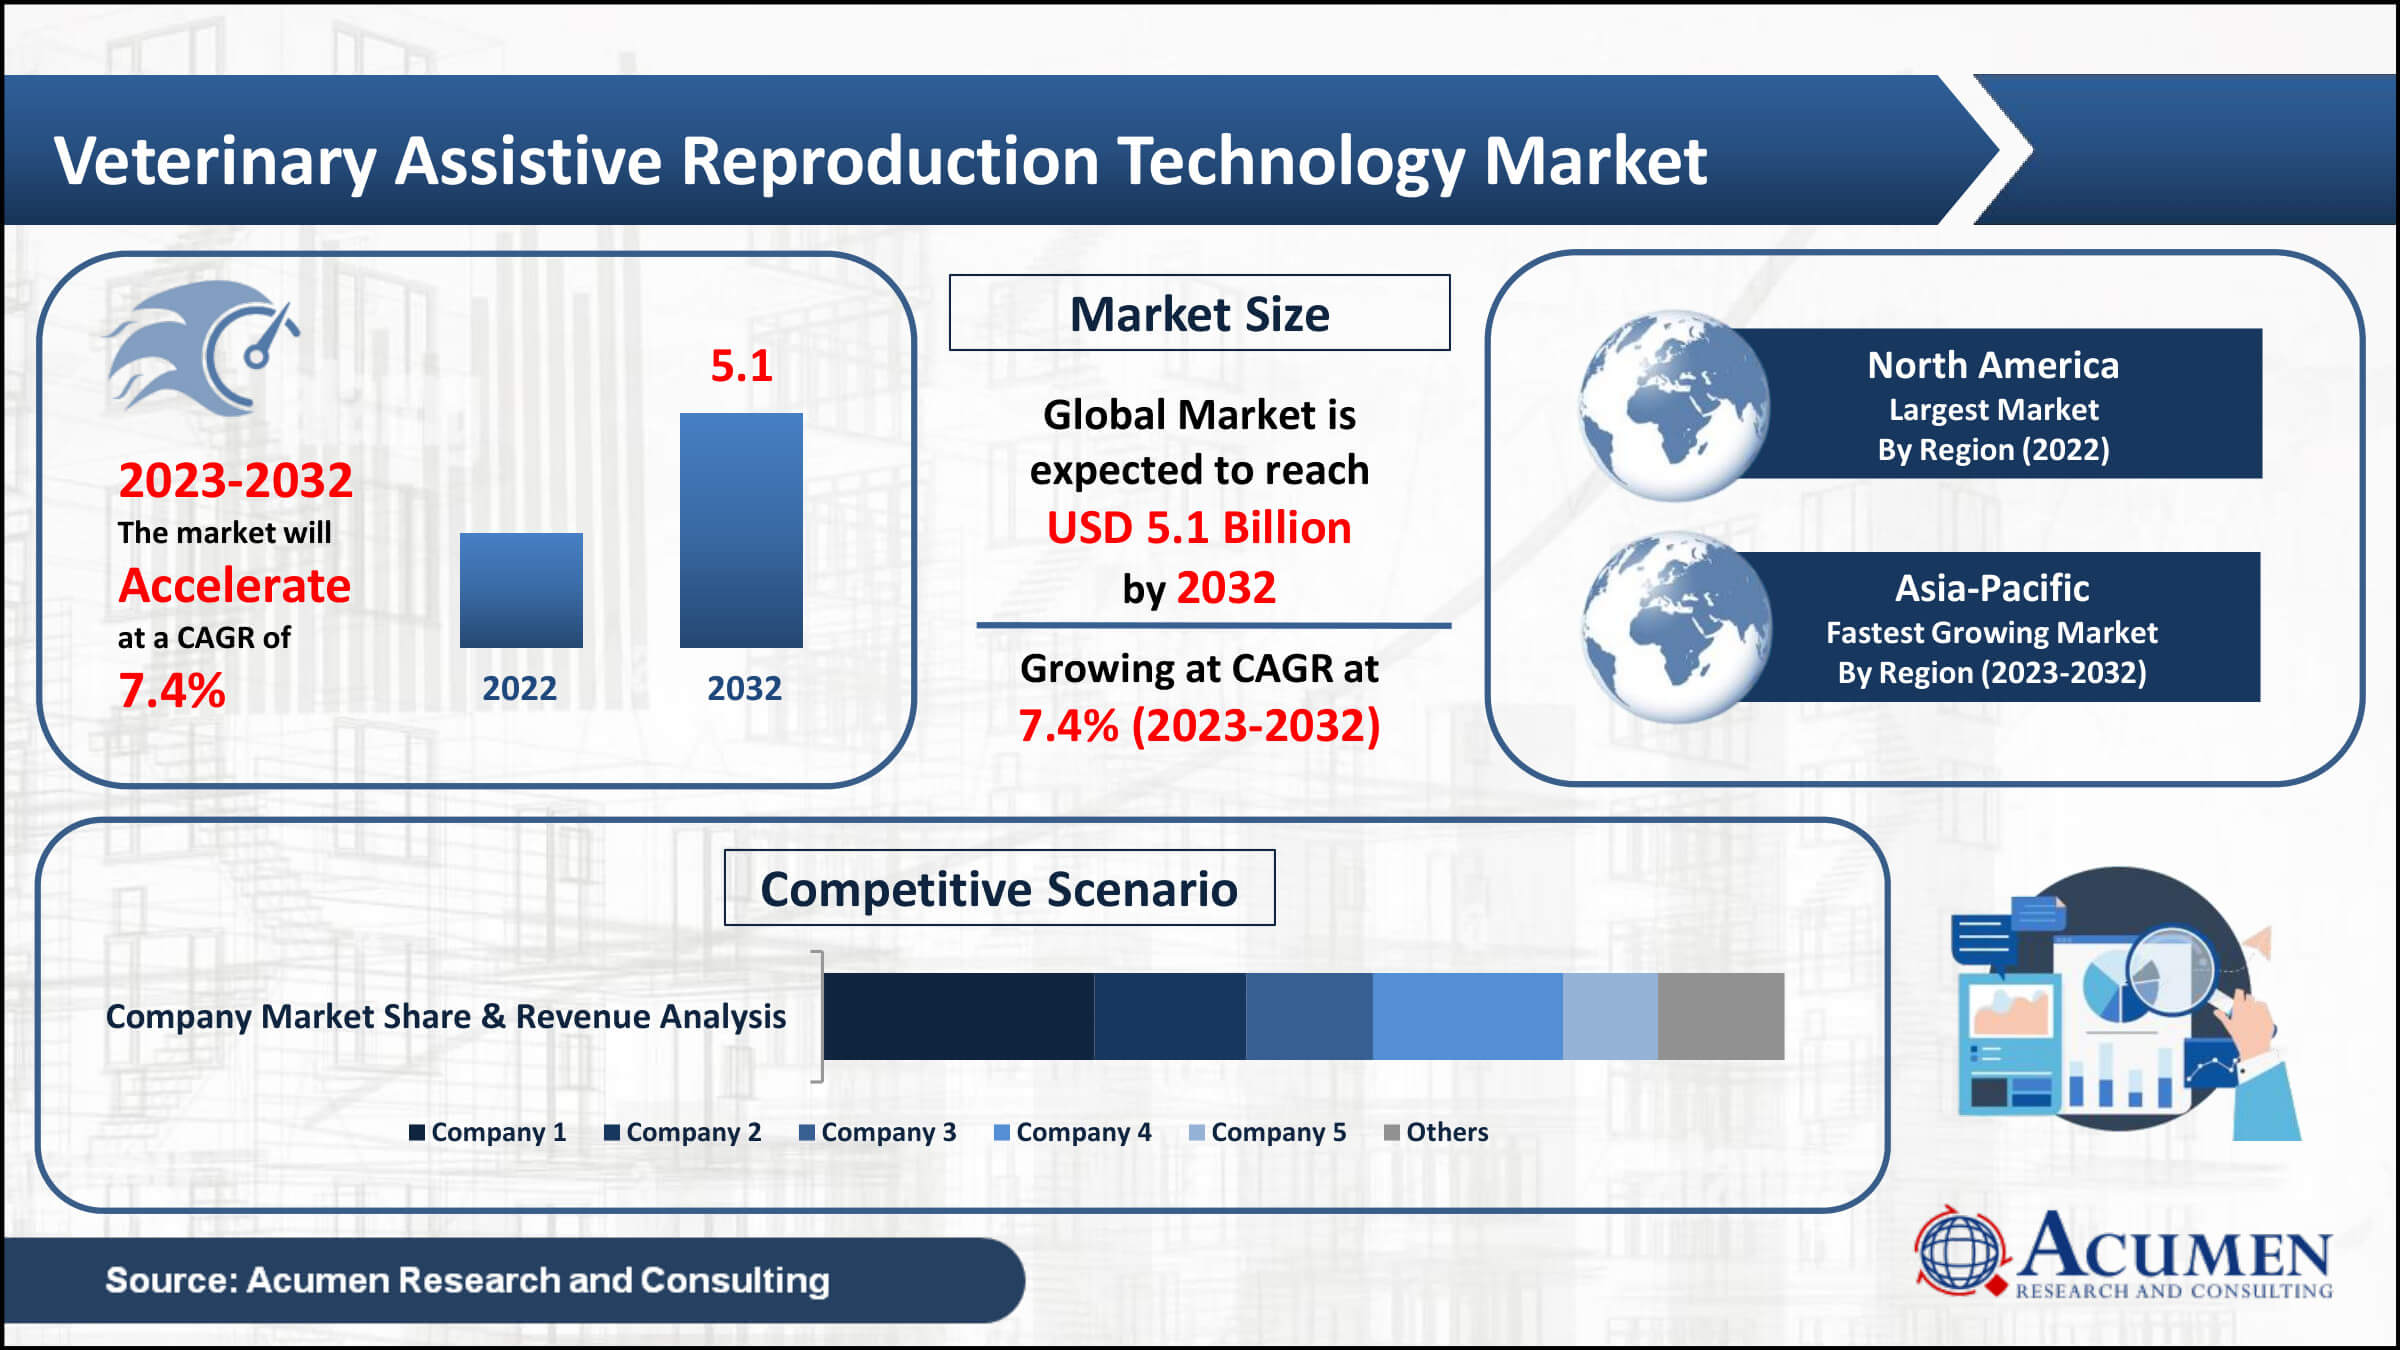 Veterinary Assistive Reproduction Technology Market Growth